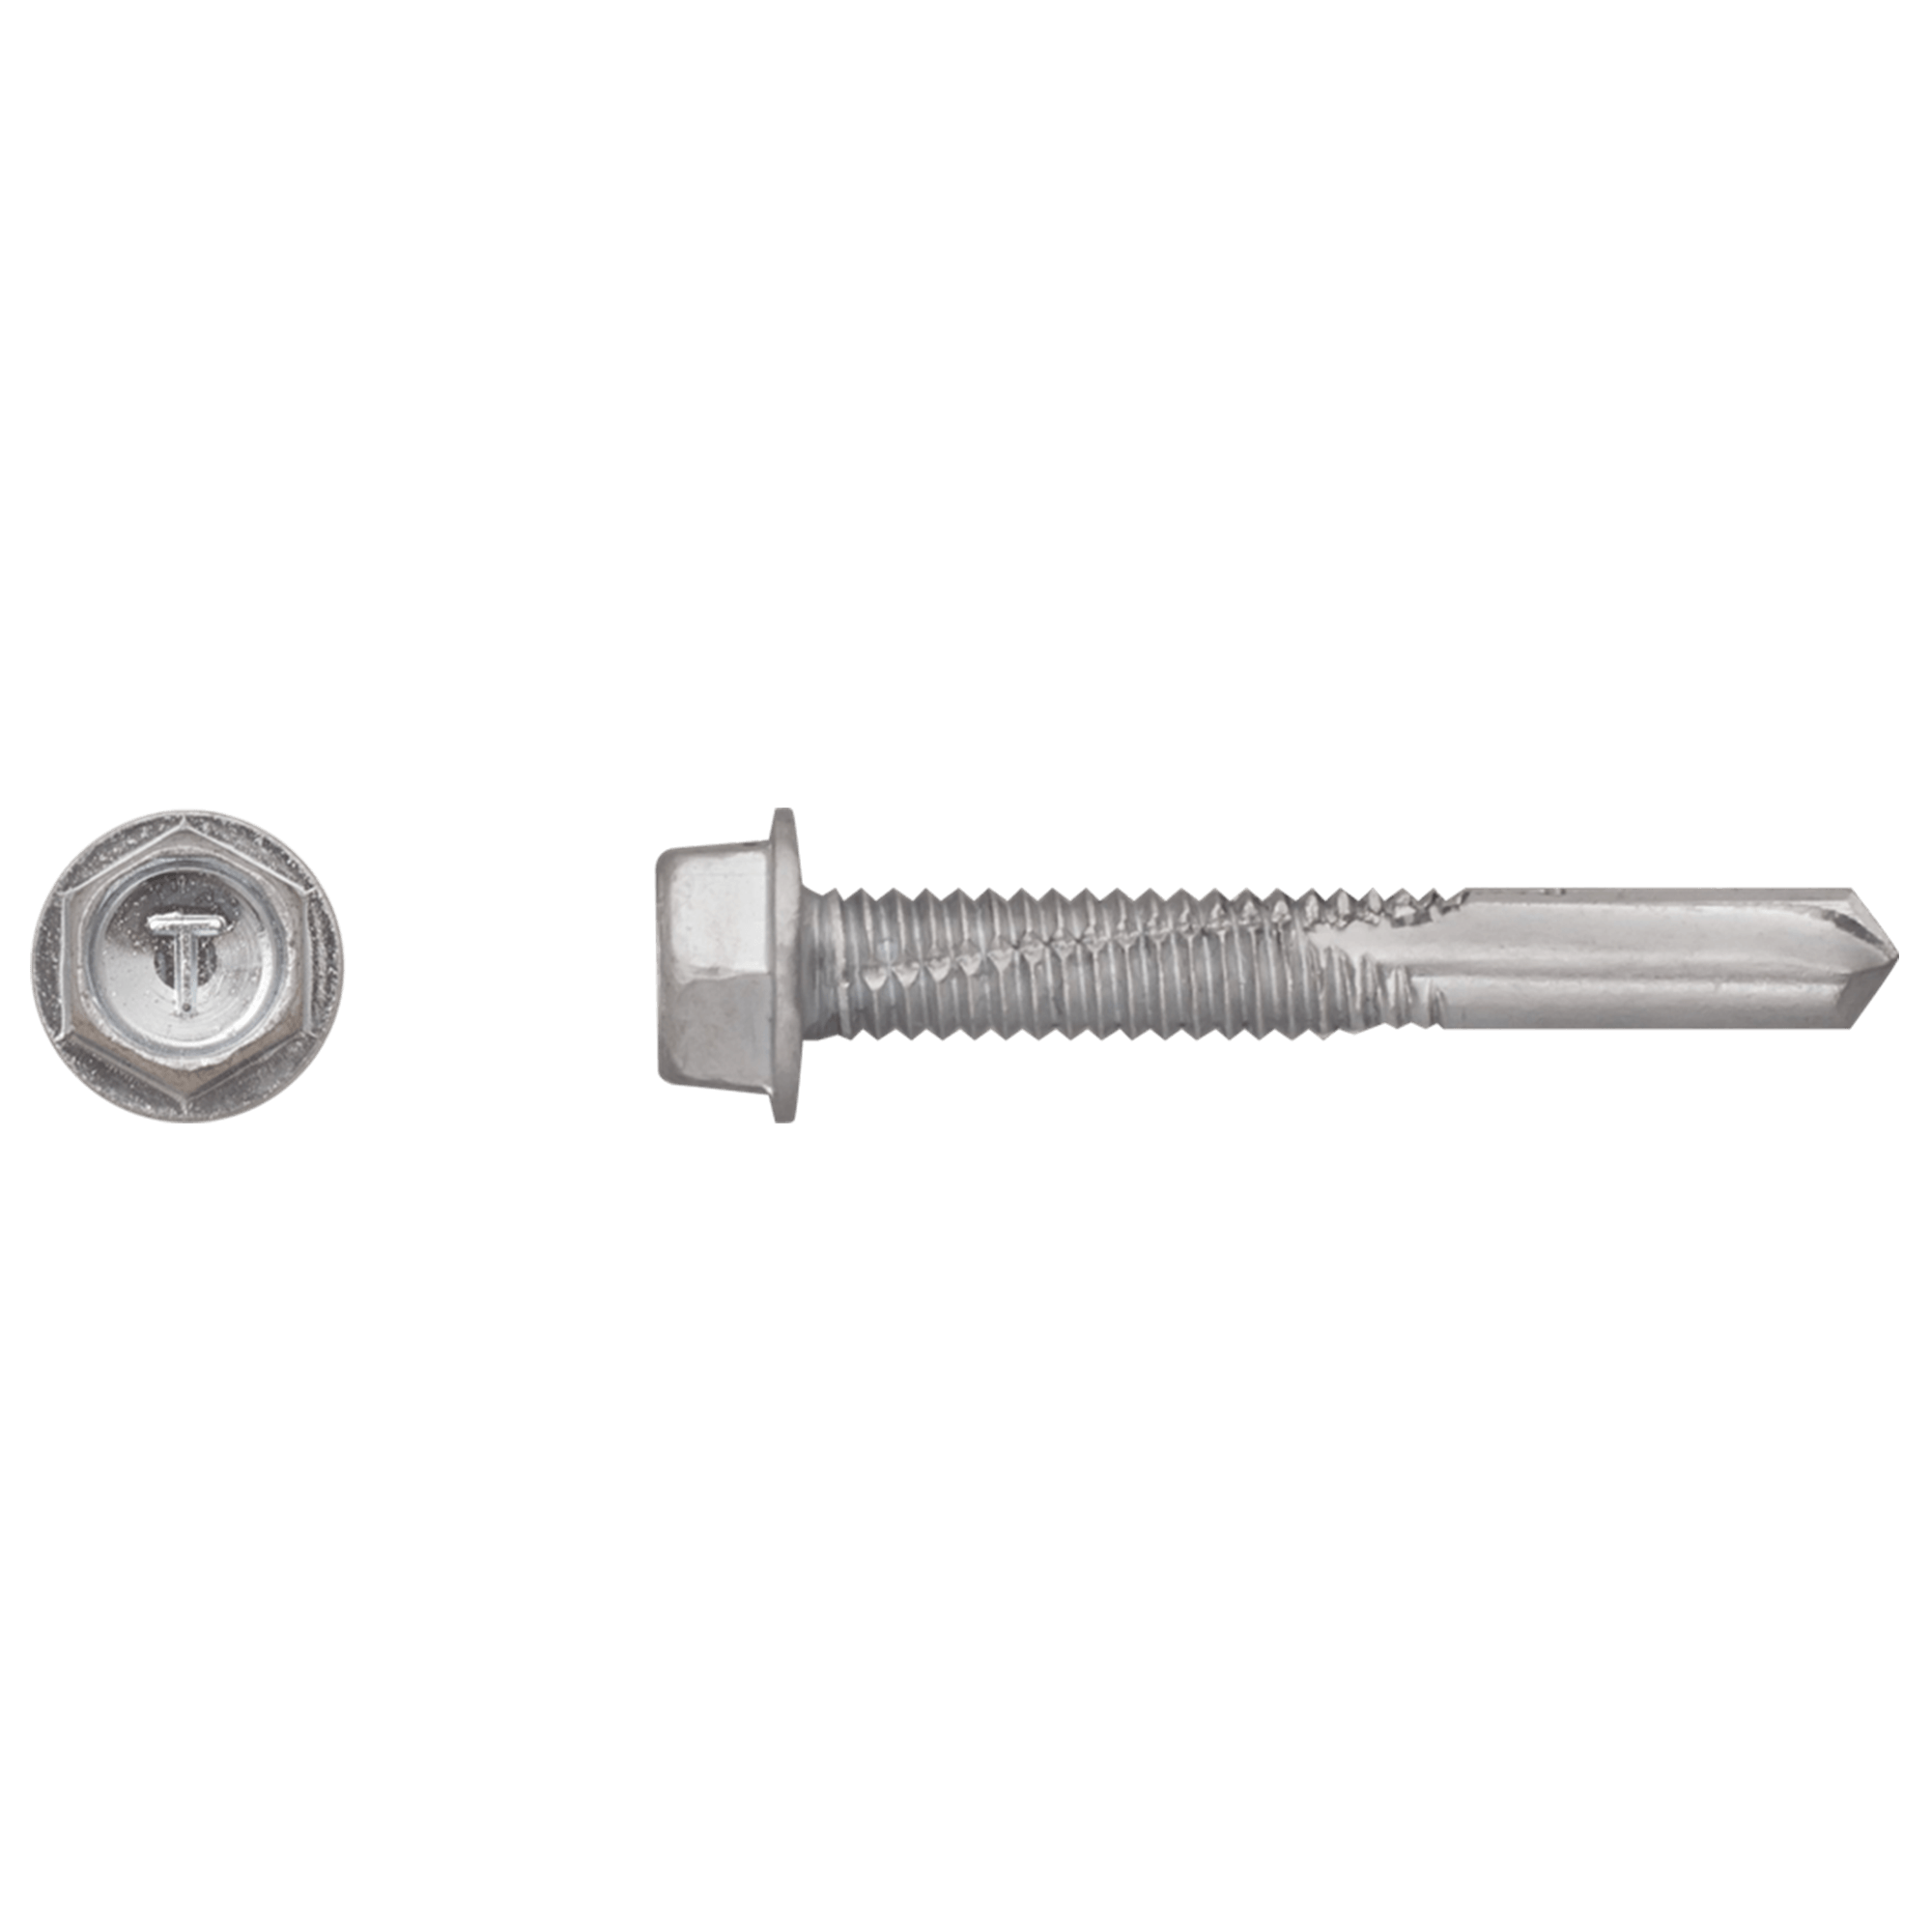 Rawlplug ON Hex Self Drilling Screws For Metal Sheets - No Washer - HG